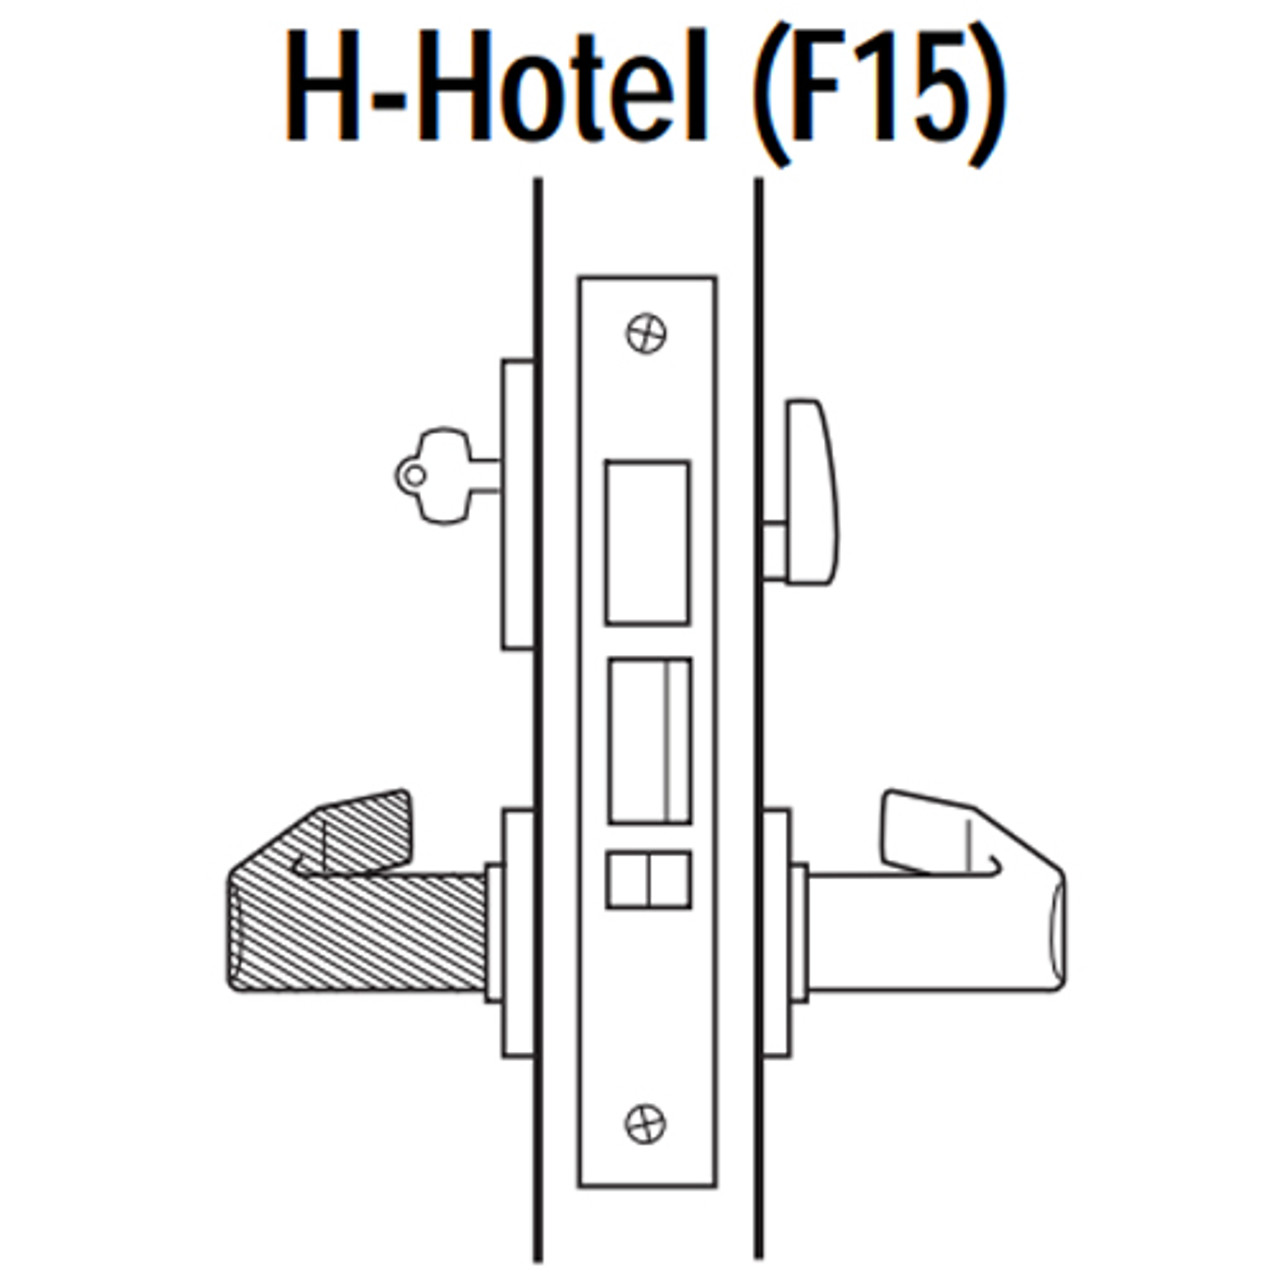 45H7H17LS690 Best 40H Series Hotel with Deadbolt Heavy Duty Mortise Lever Lock with Gull Wing LH in Dark Bronze